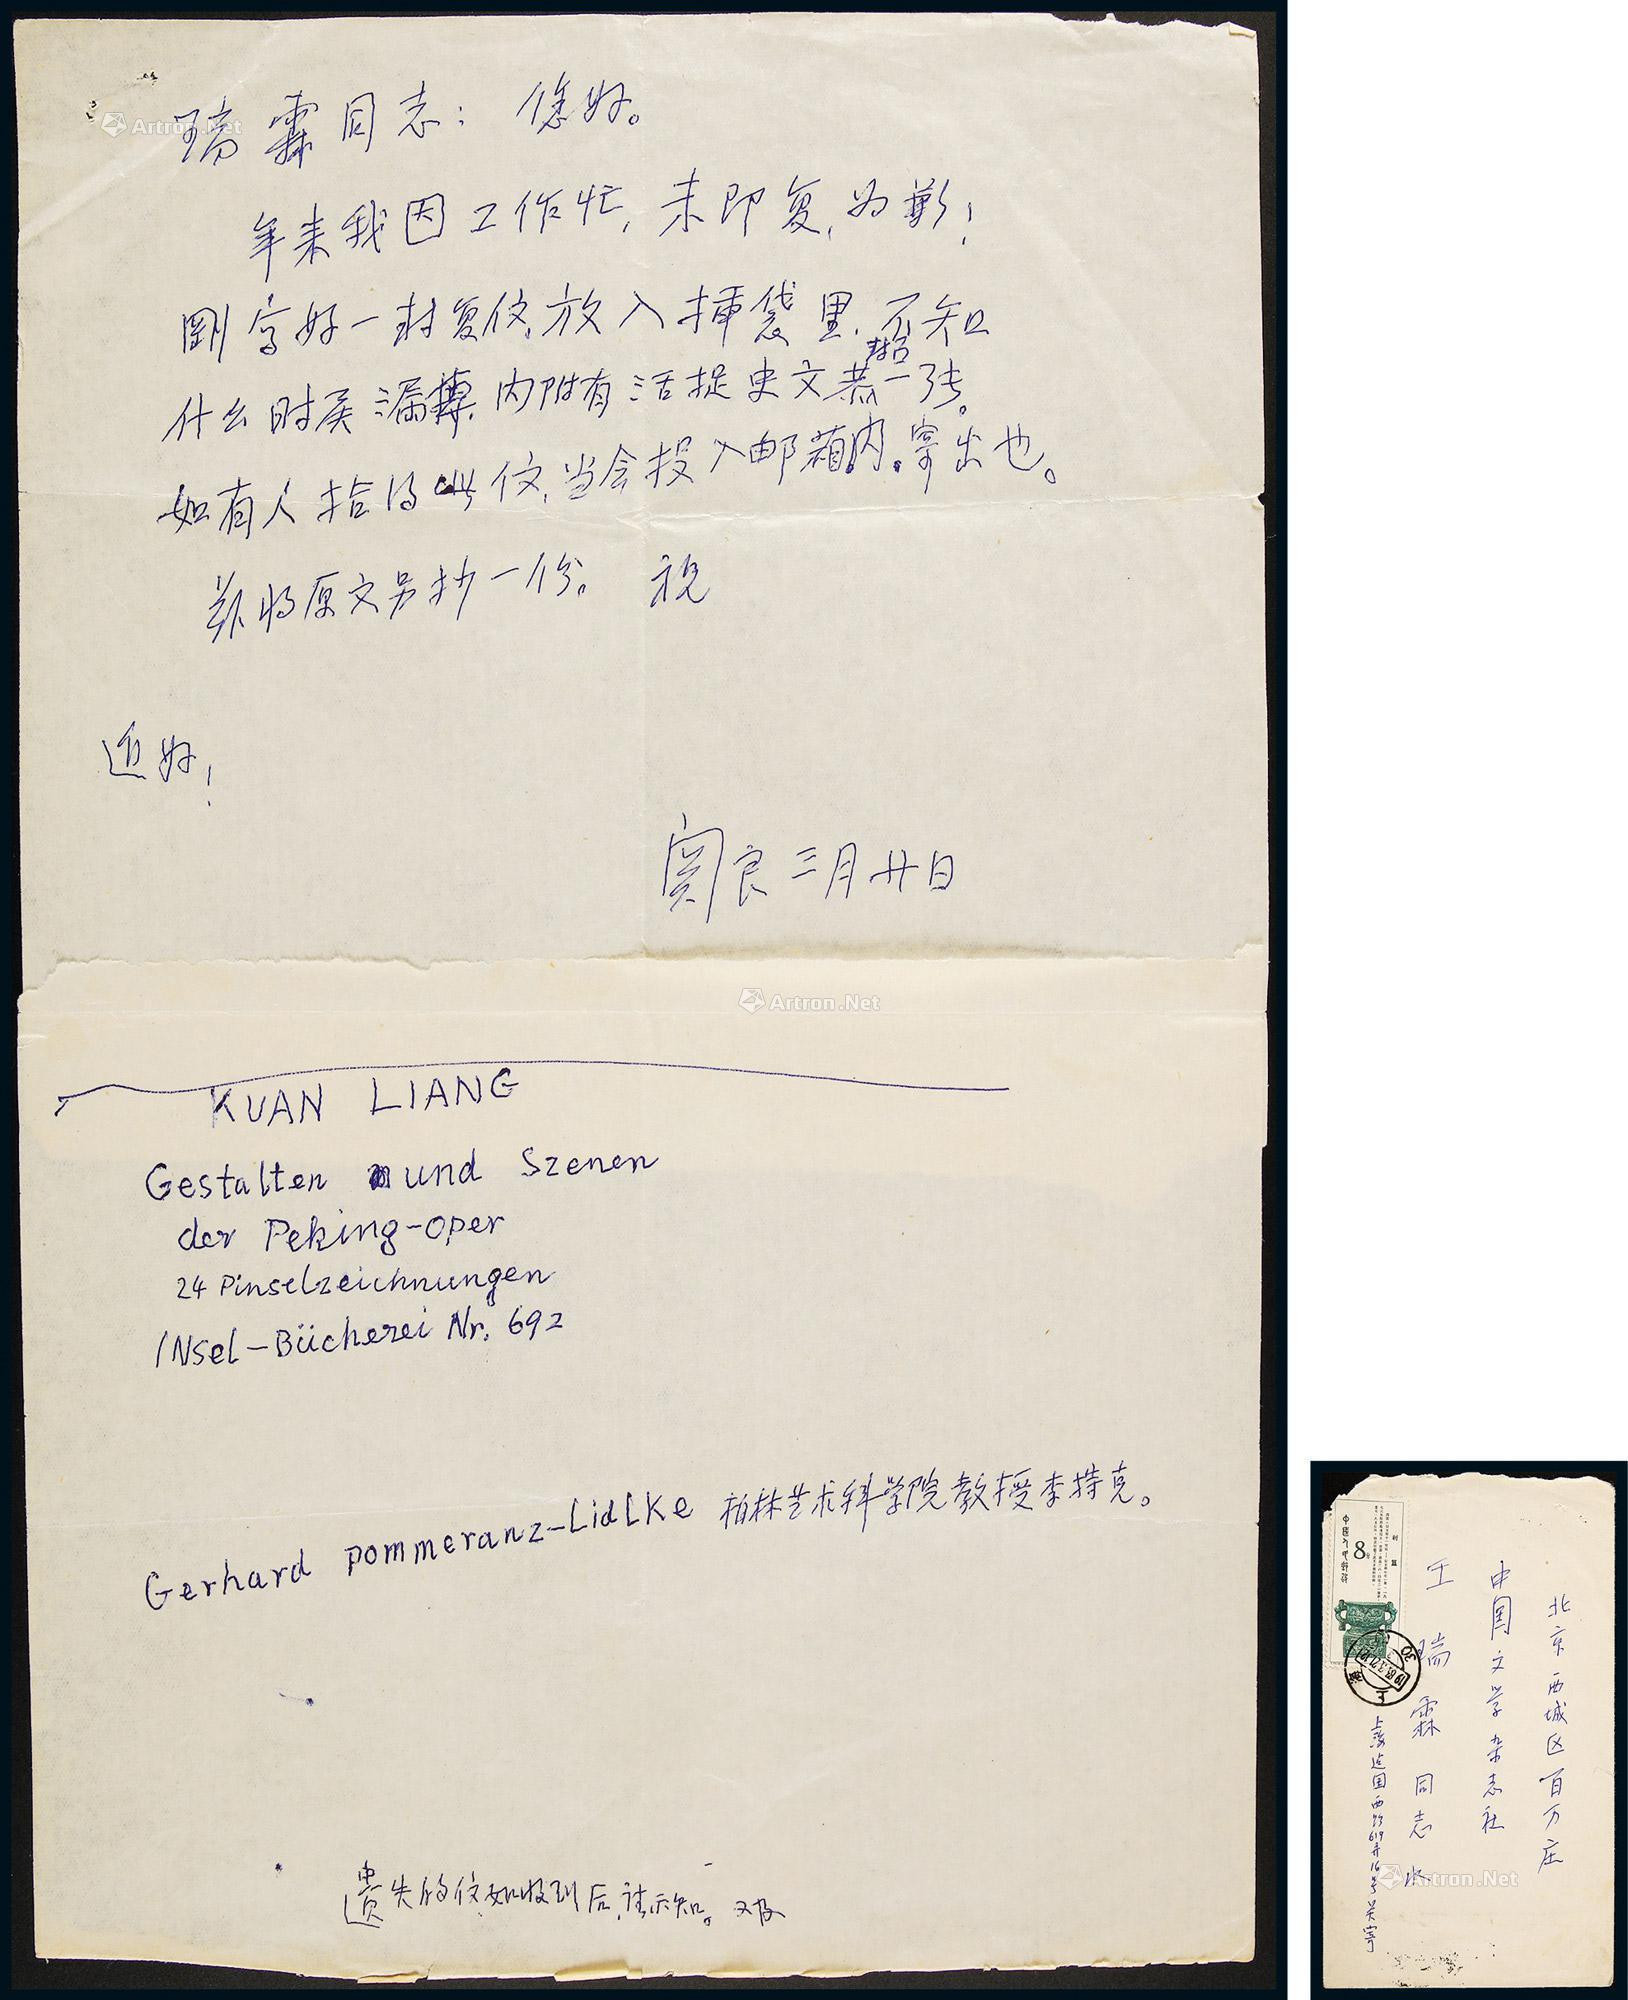 Letter of one page by Guan Liang to Wang Ruilin in 1983, with original cover